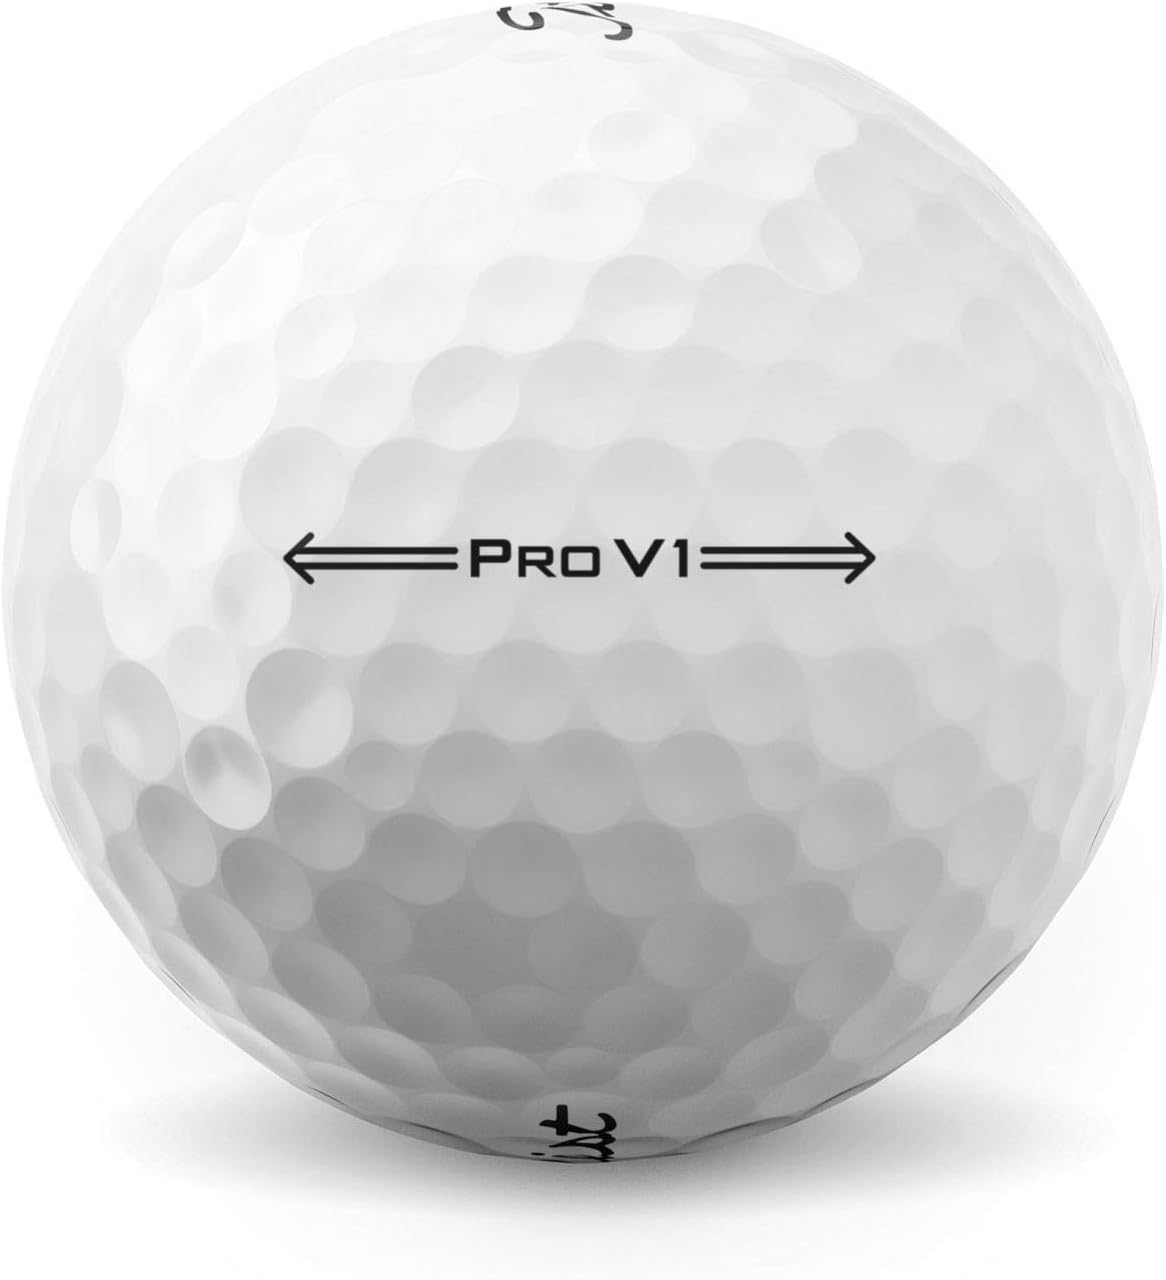 Titleist Pro V1 Golf Balls: The Ultimate Performance Review